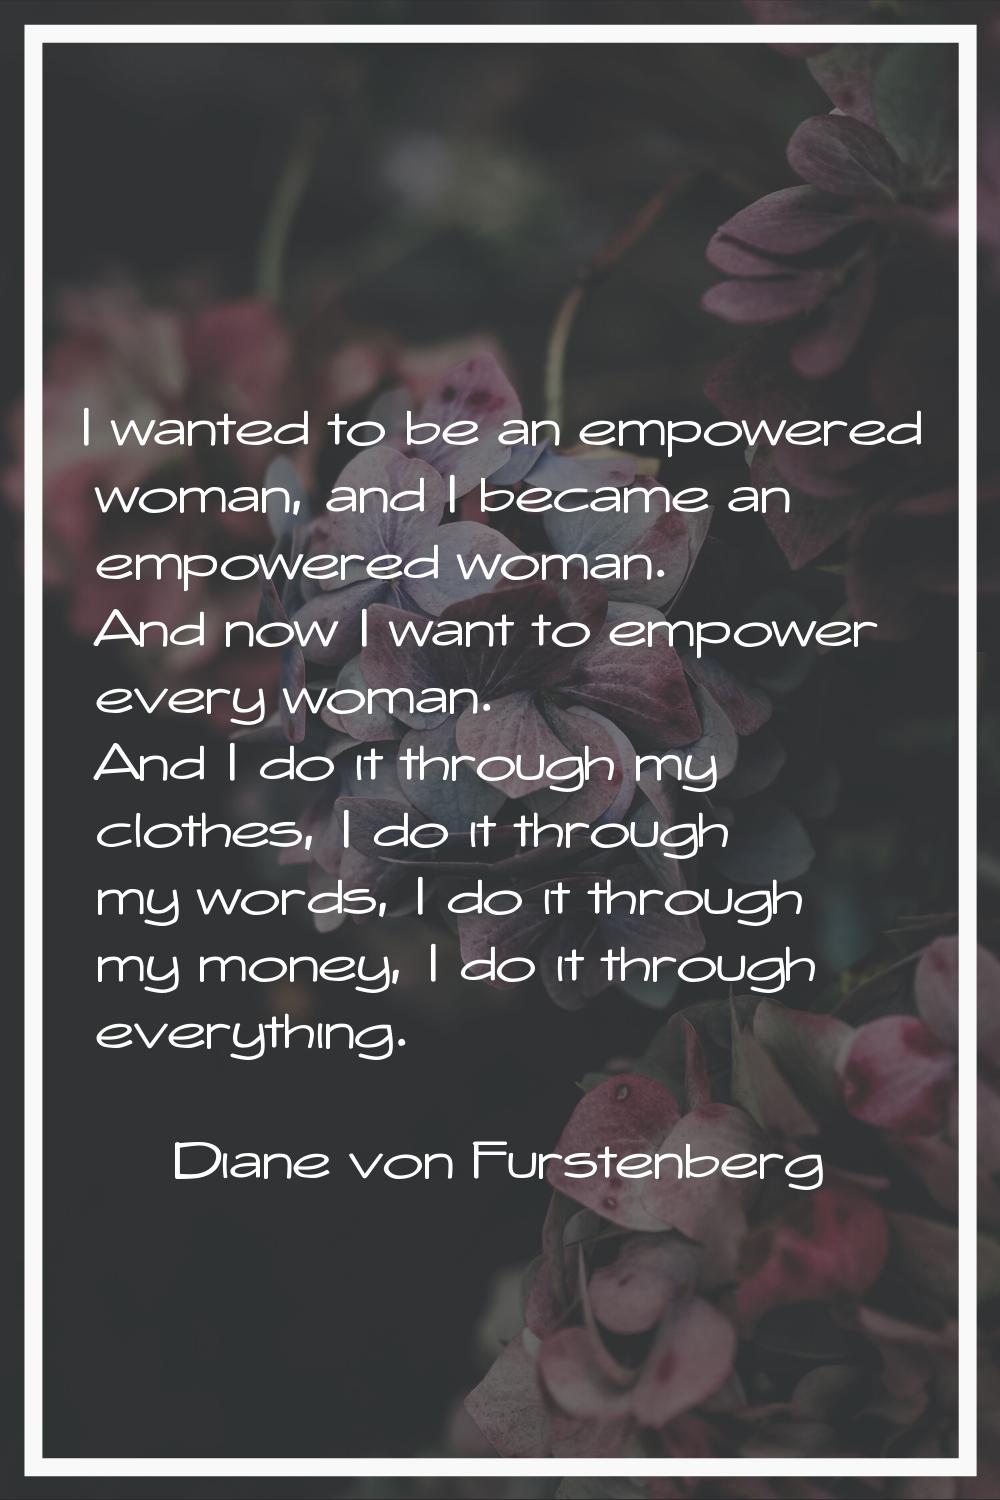 I wanted to be an empowered woman, and I became an empowered woman. And now I want to empower every